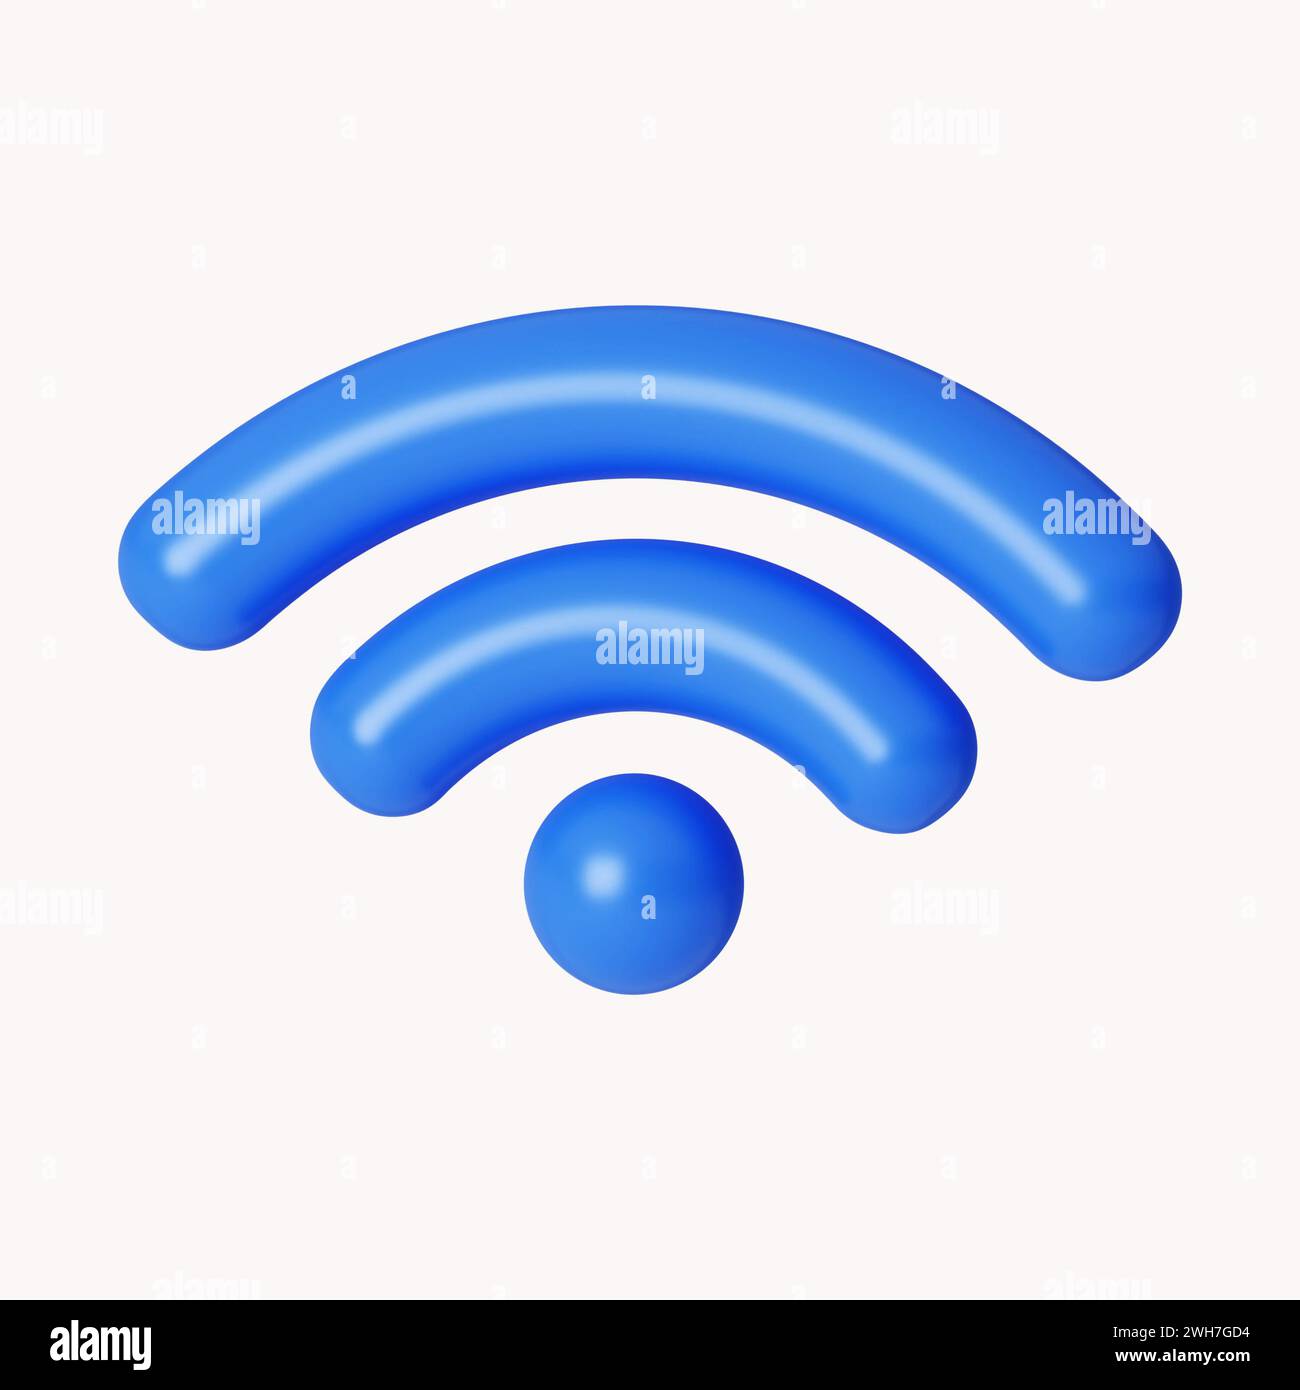 3d Wi Fi Wireless Network Symbol. icon isolated on white background. 3d rendering illustration. Clipping path. Stock Photo